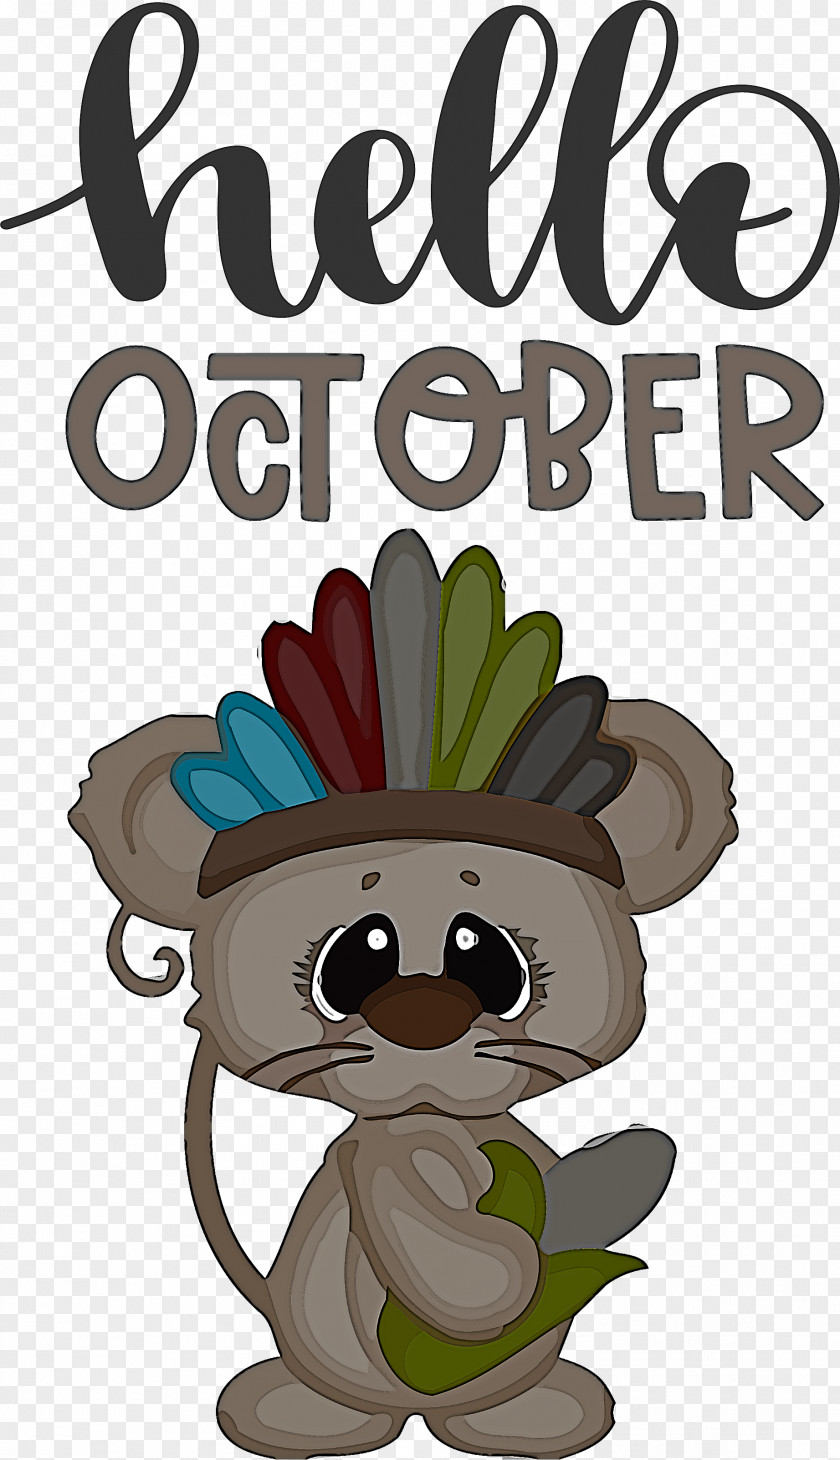 Hello October Autumn PNG